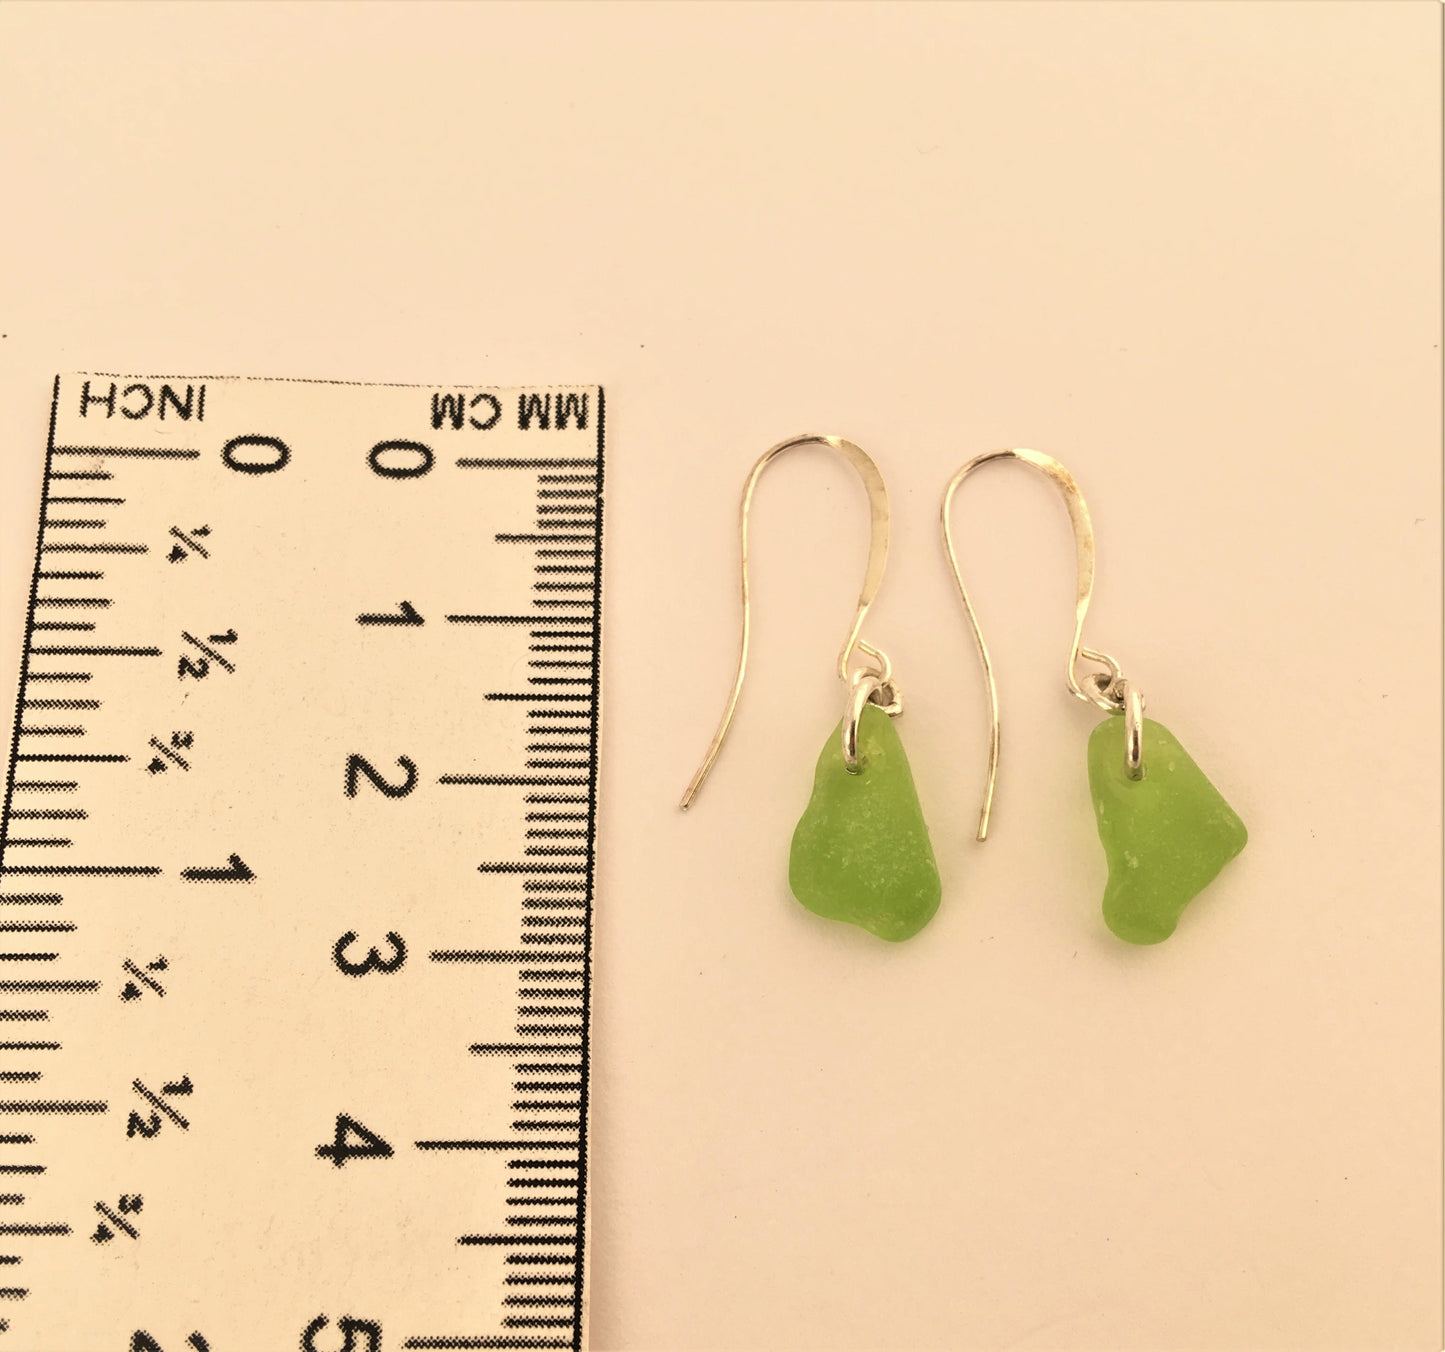 Shoreline Earrings - Lime Green sea glass from Northern California on a hypoallergenic nickle-free hook